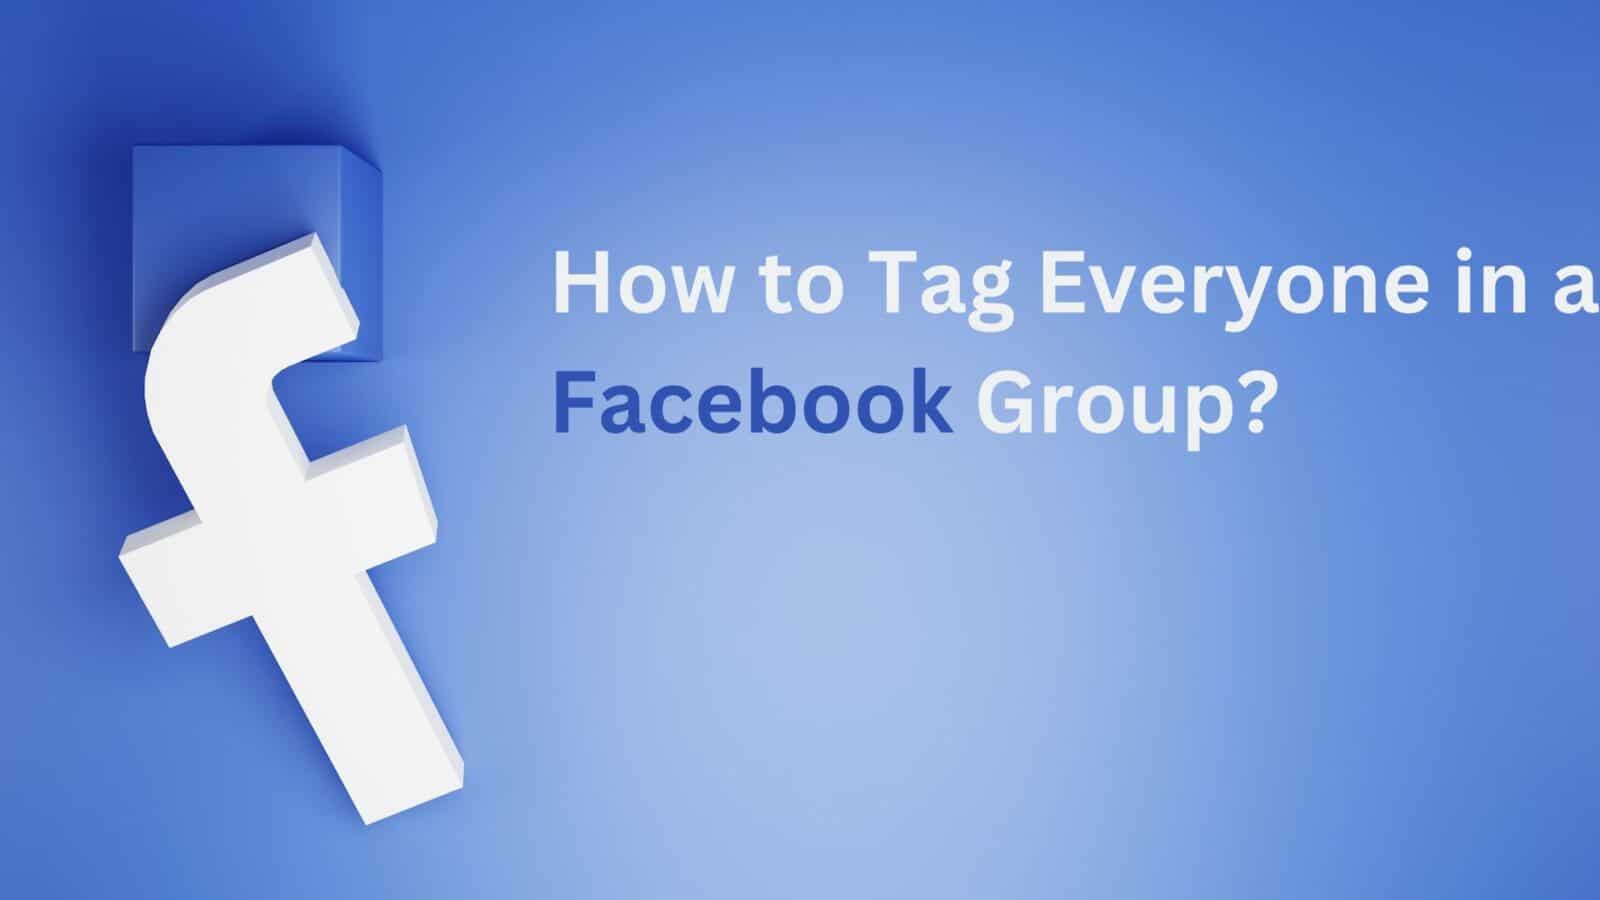 How to Tag Everyone in a Facebook Group